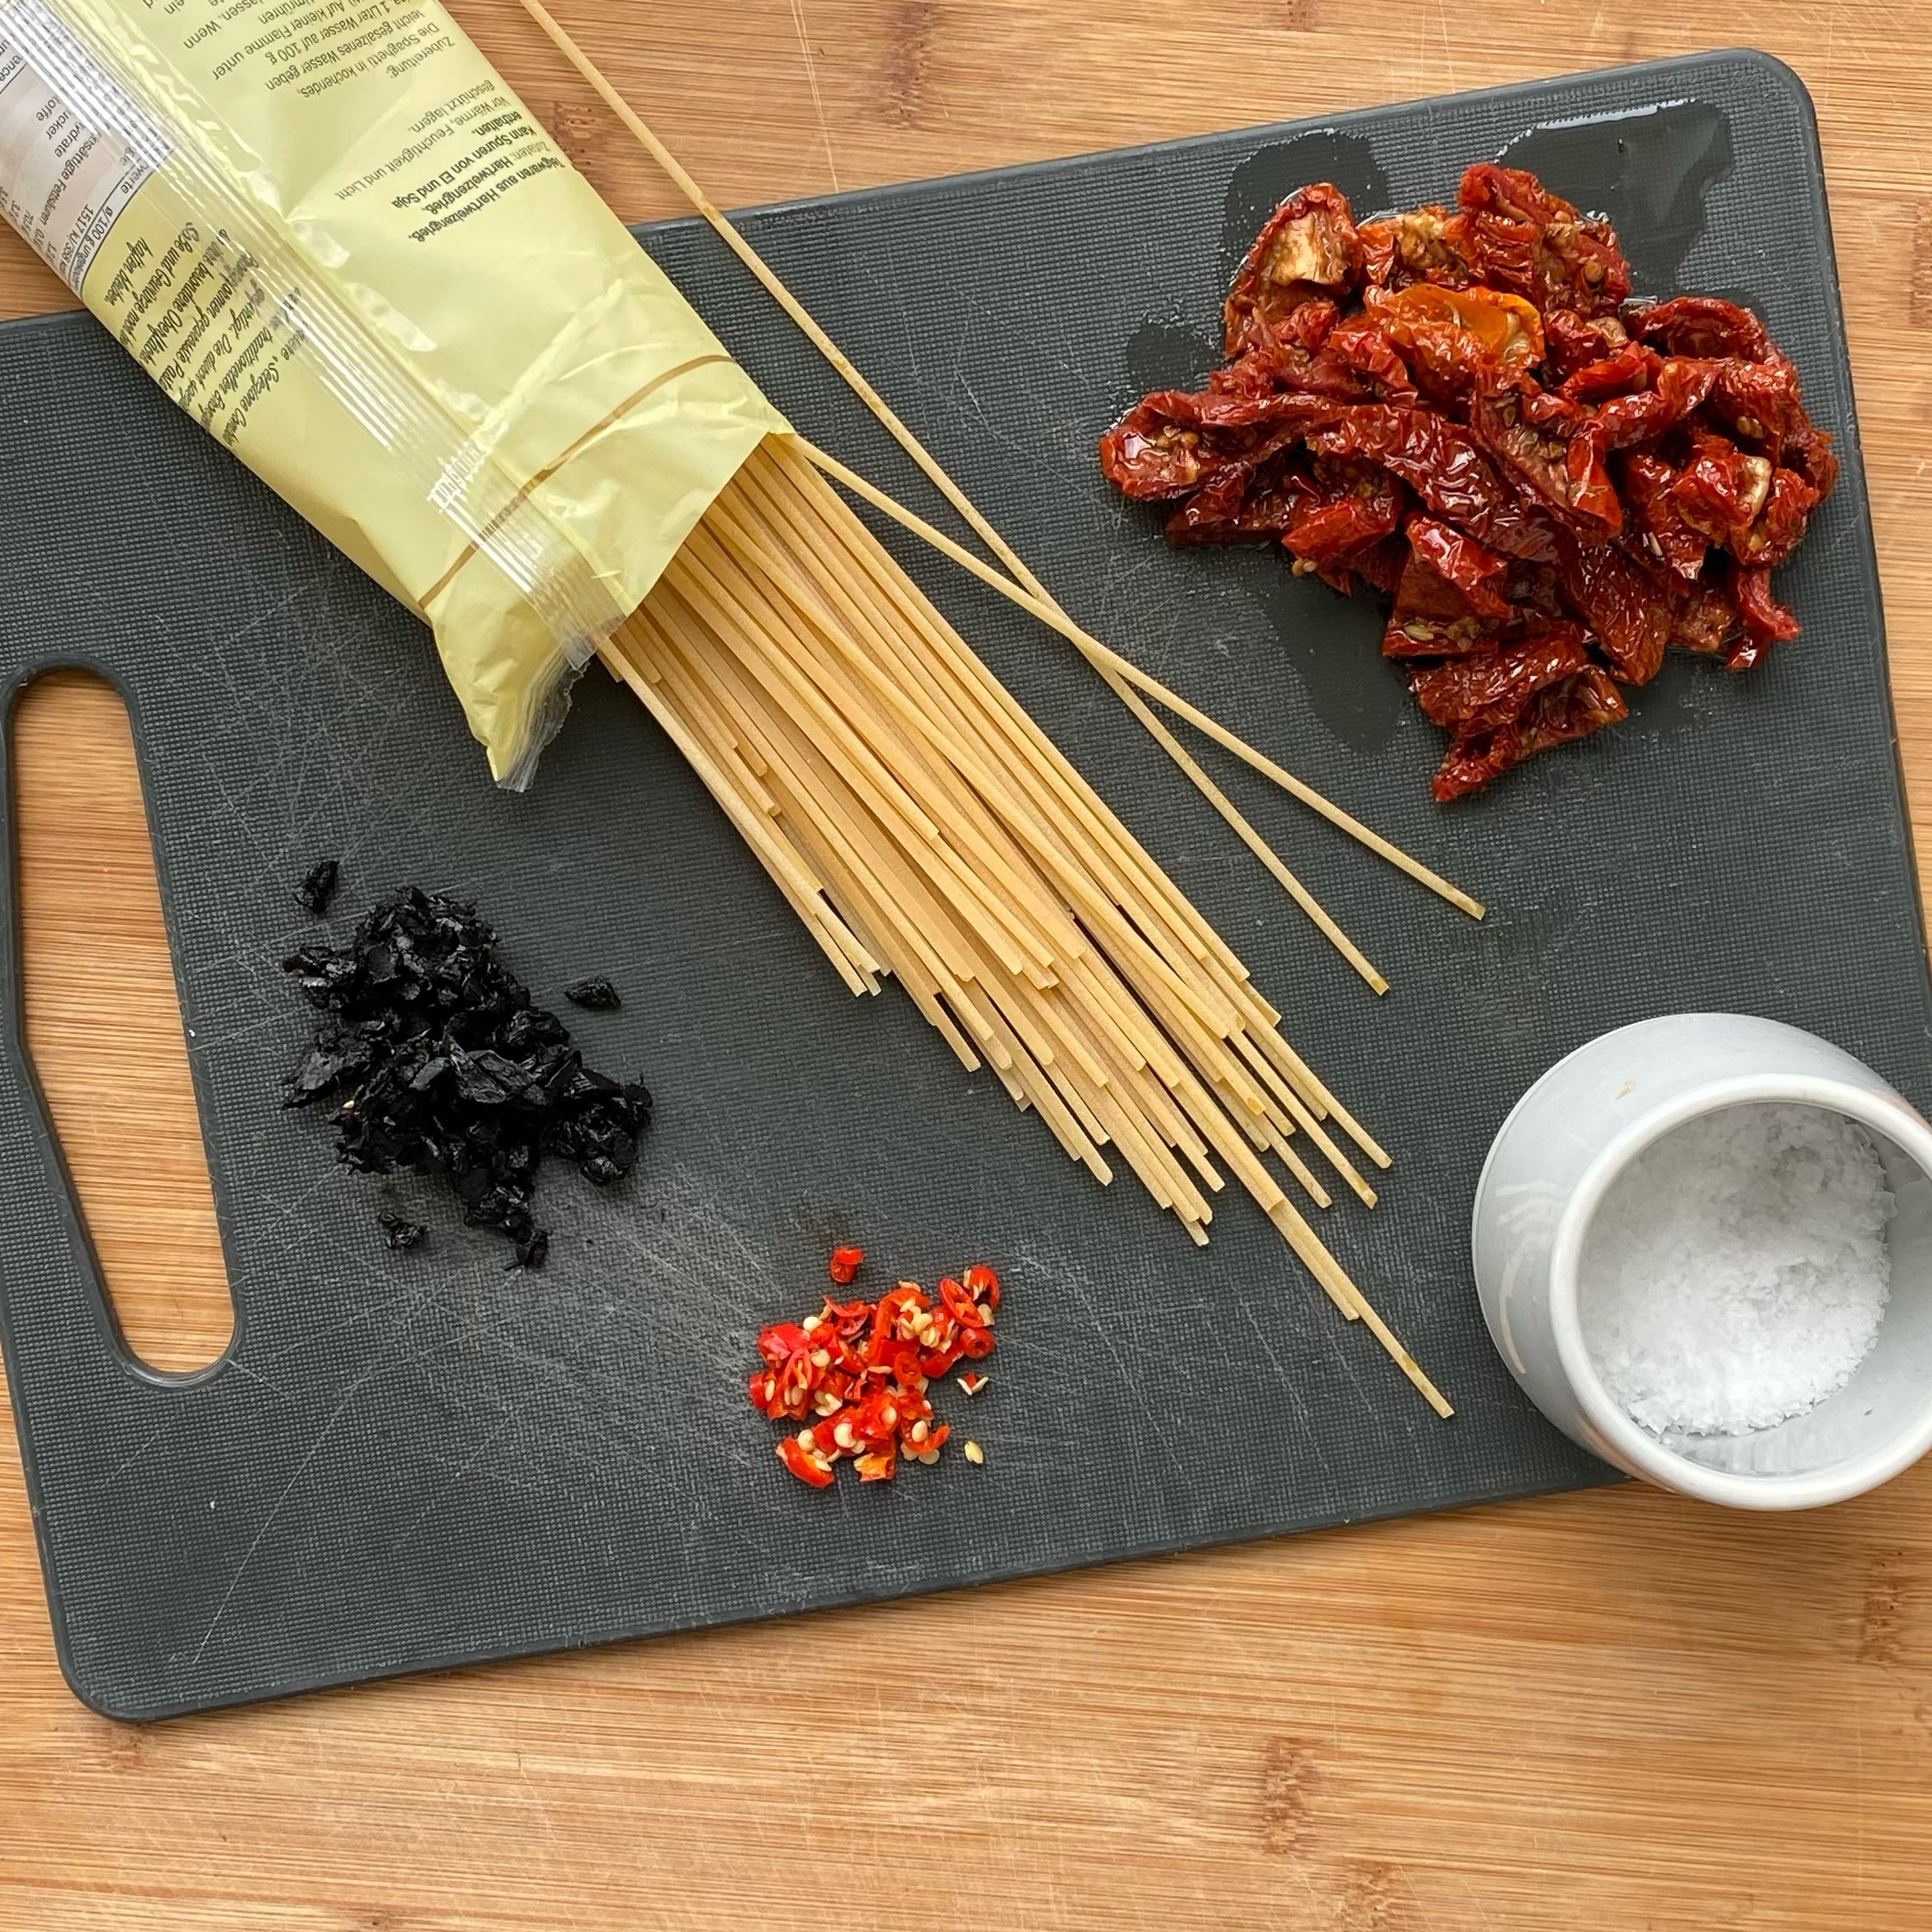 Cut the dried tomatoes in small-middle pieces and chop the chili* & black garlic finely. *As much as I love my aglio e olio spicy, I prefer this version a little sweeter. So you may be careful with the chili:)